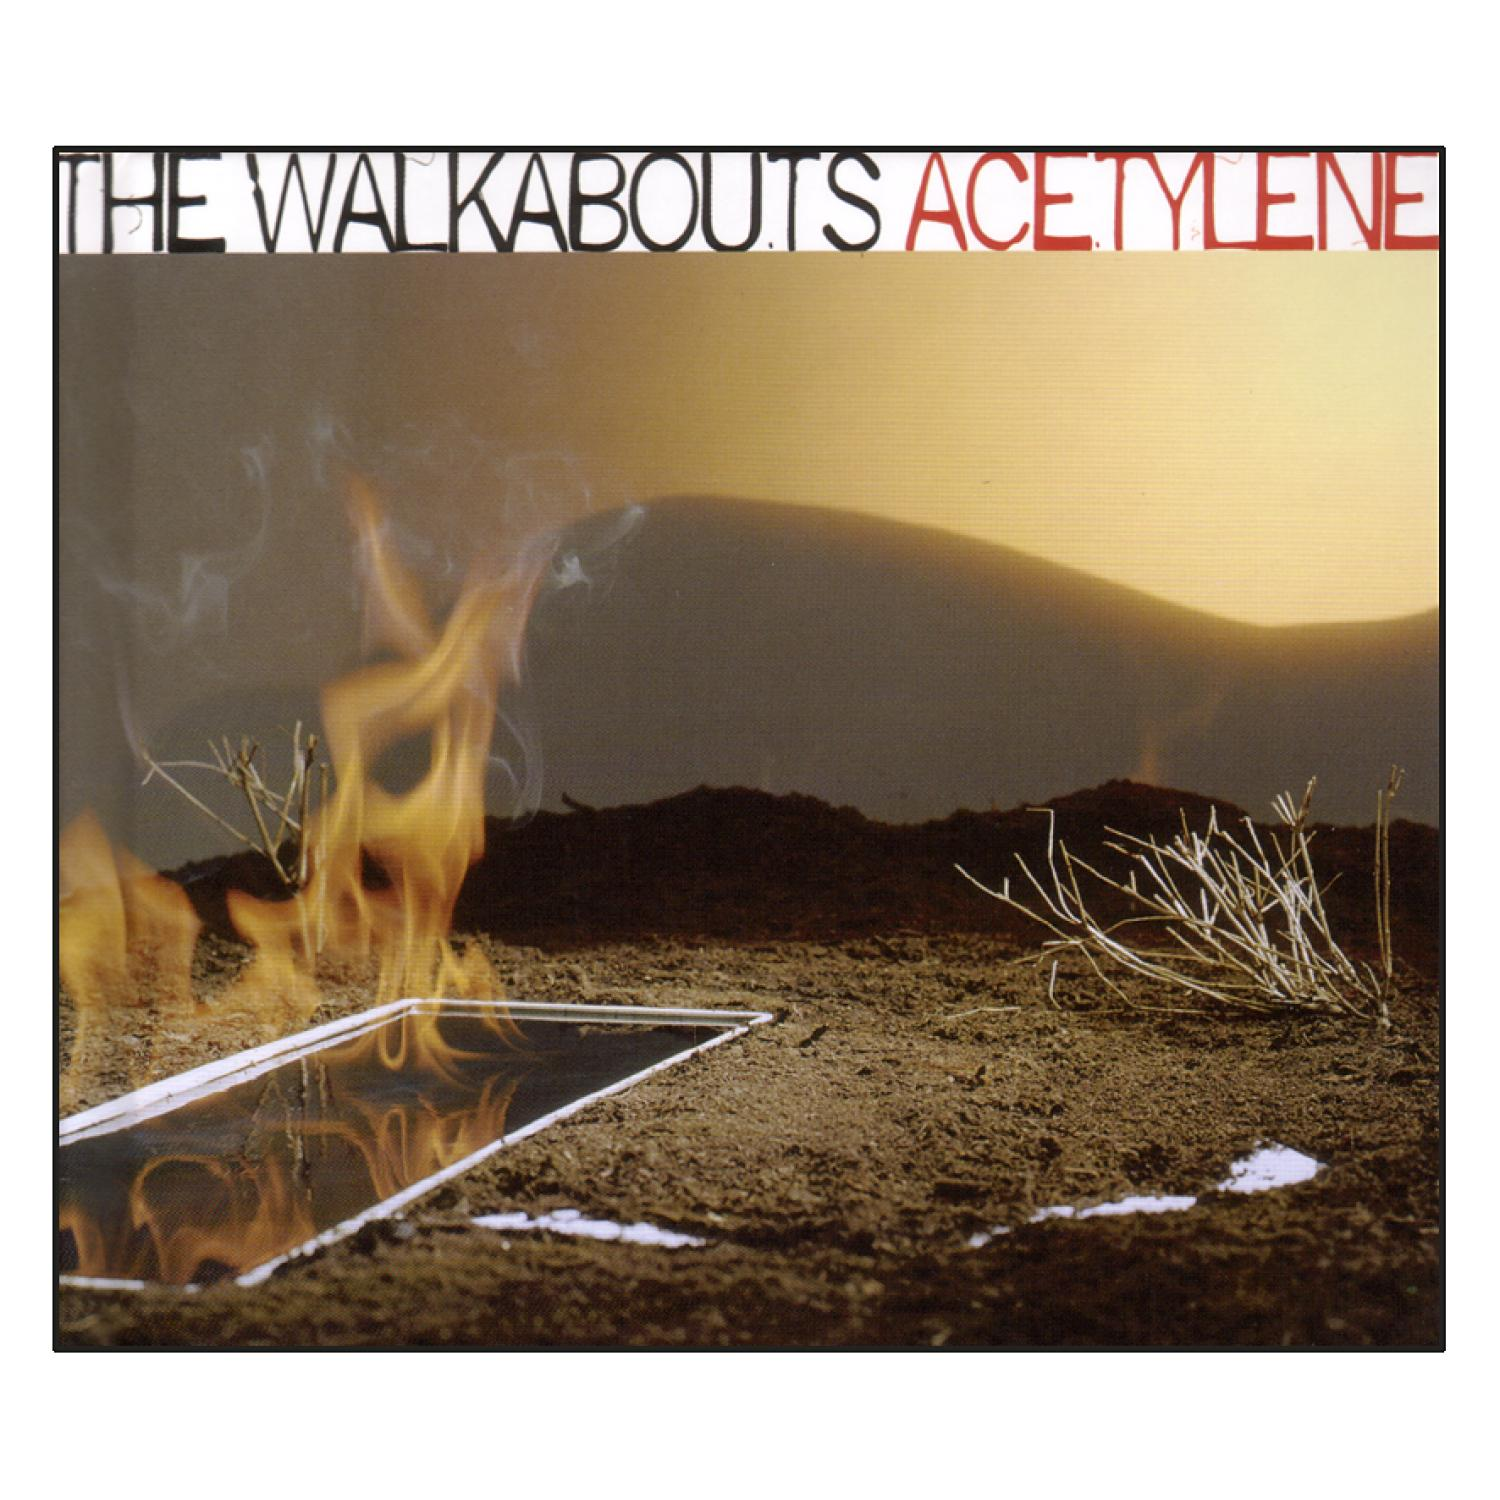 The Walkabouts - (CD) Acetylene 